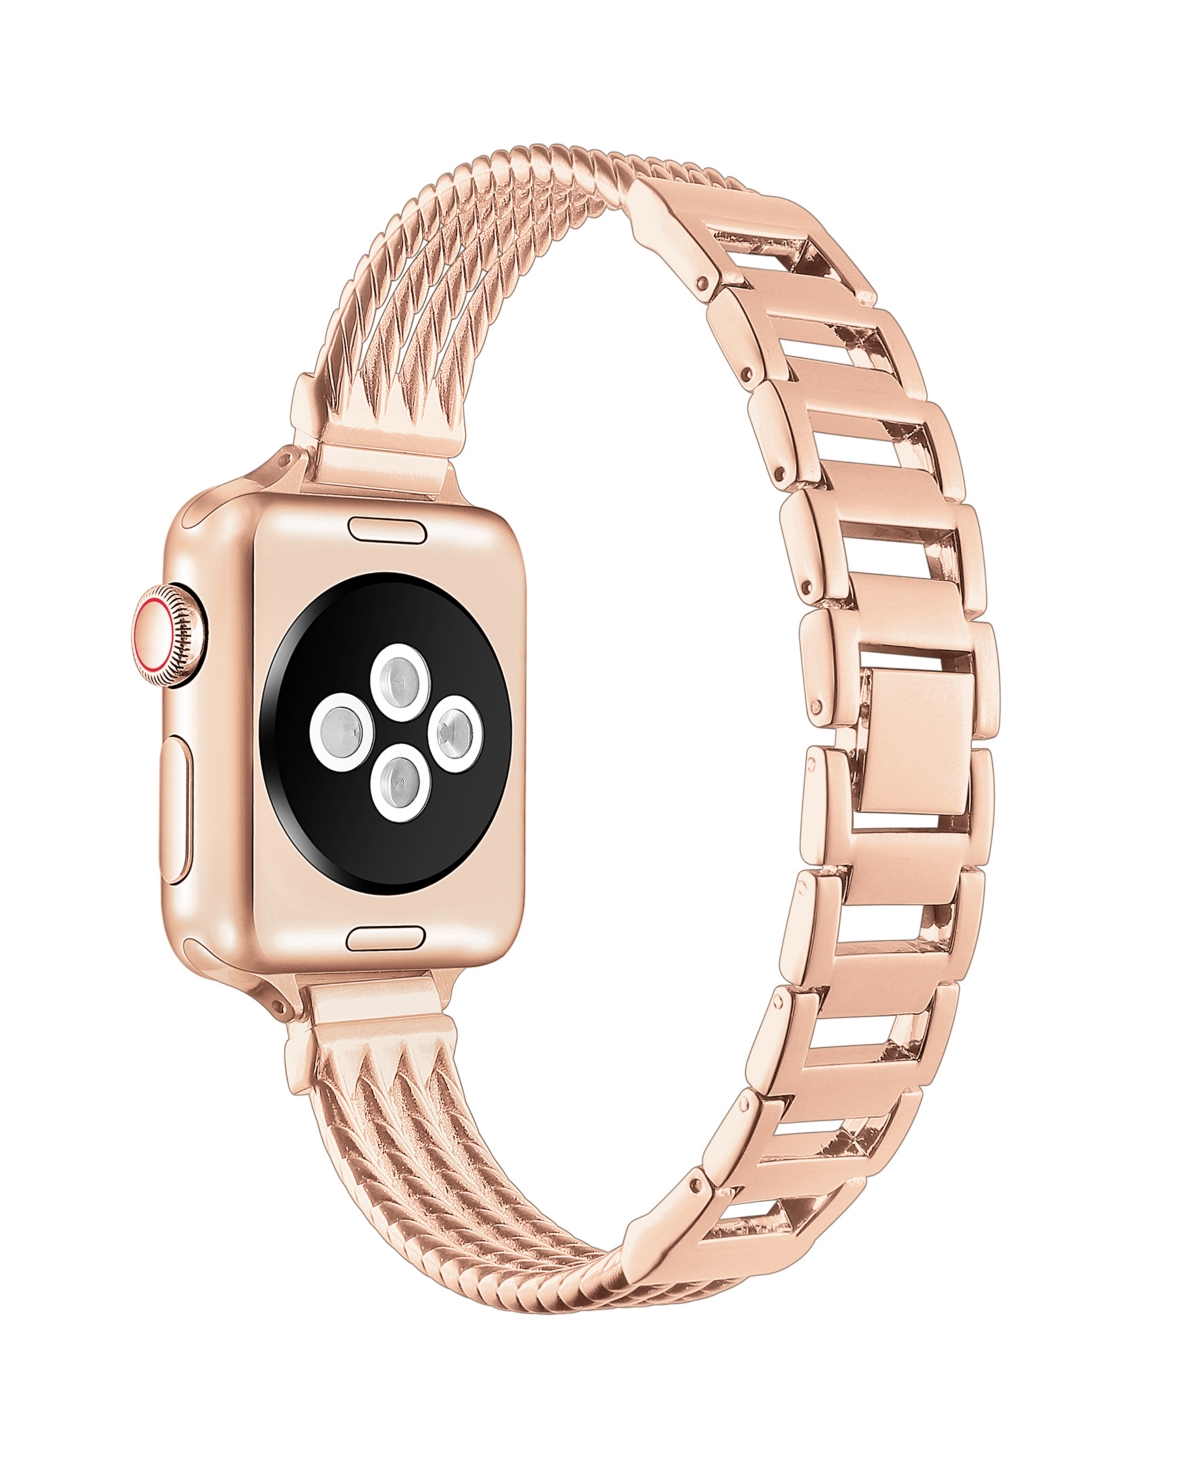 Shop Posh Tech Unisex Clara Stainless Steel Bracelet Band For Apple Watch Size-42mm,44mm,45mm,49mm In Gold